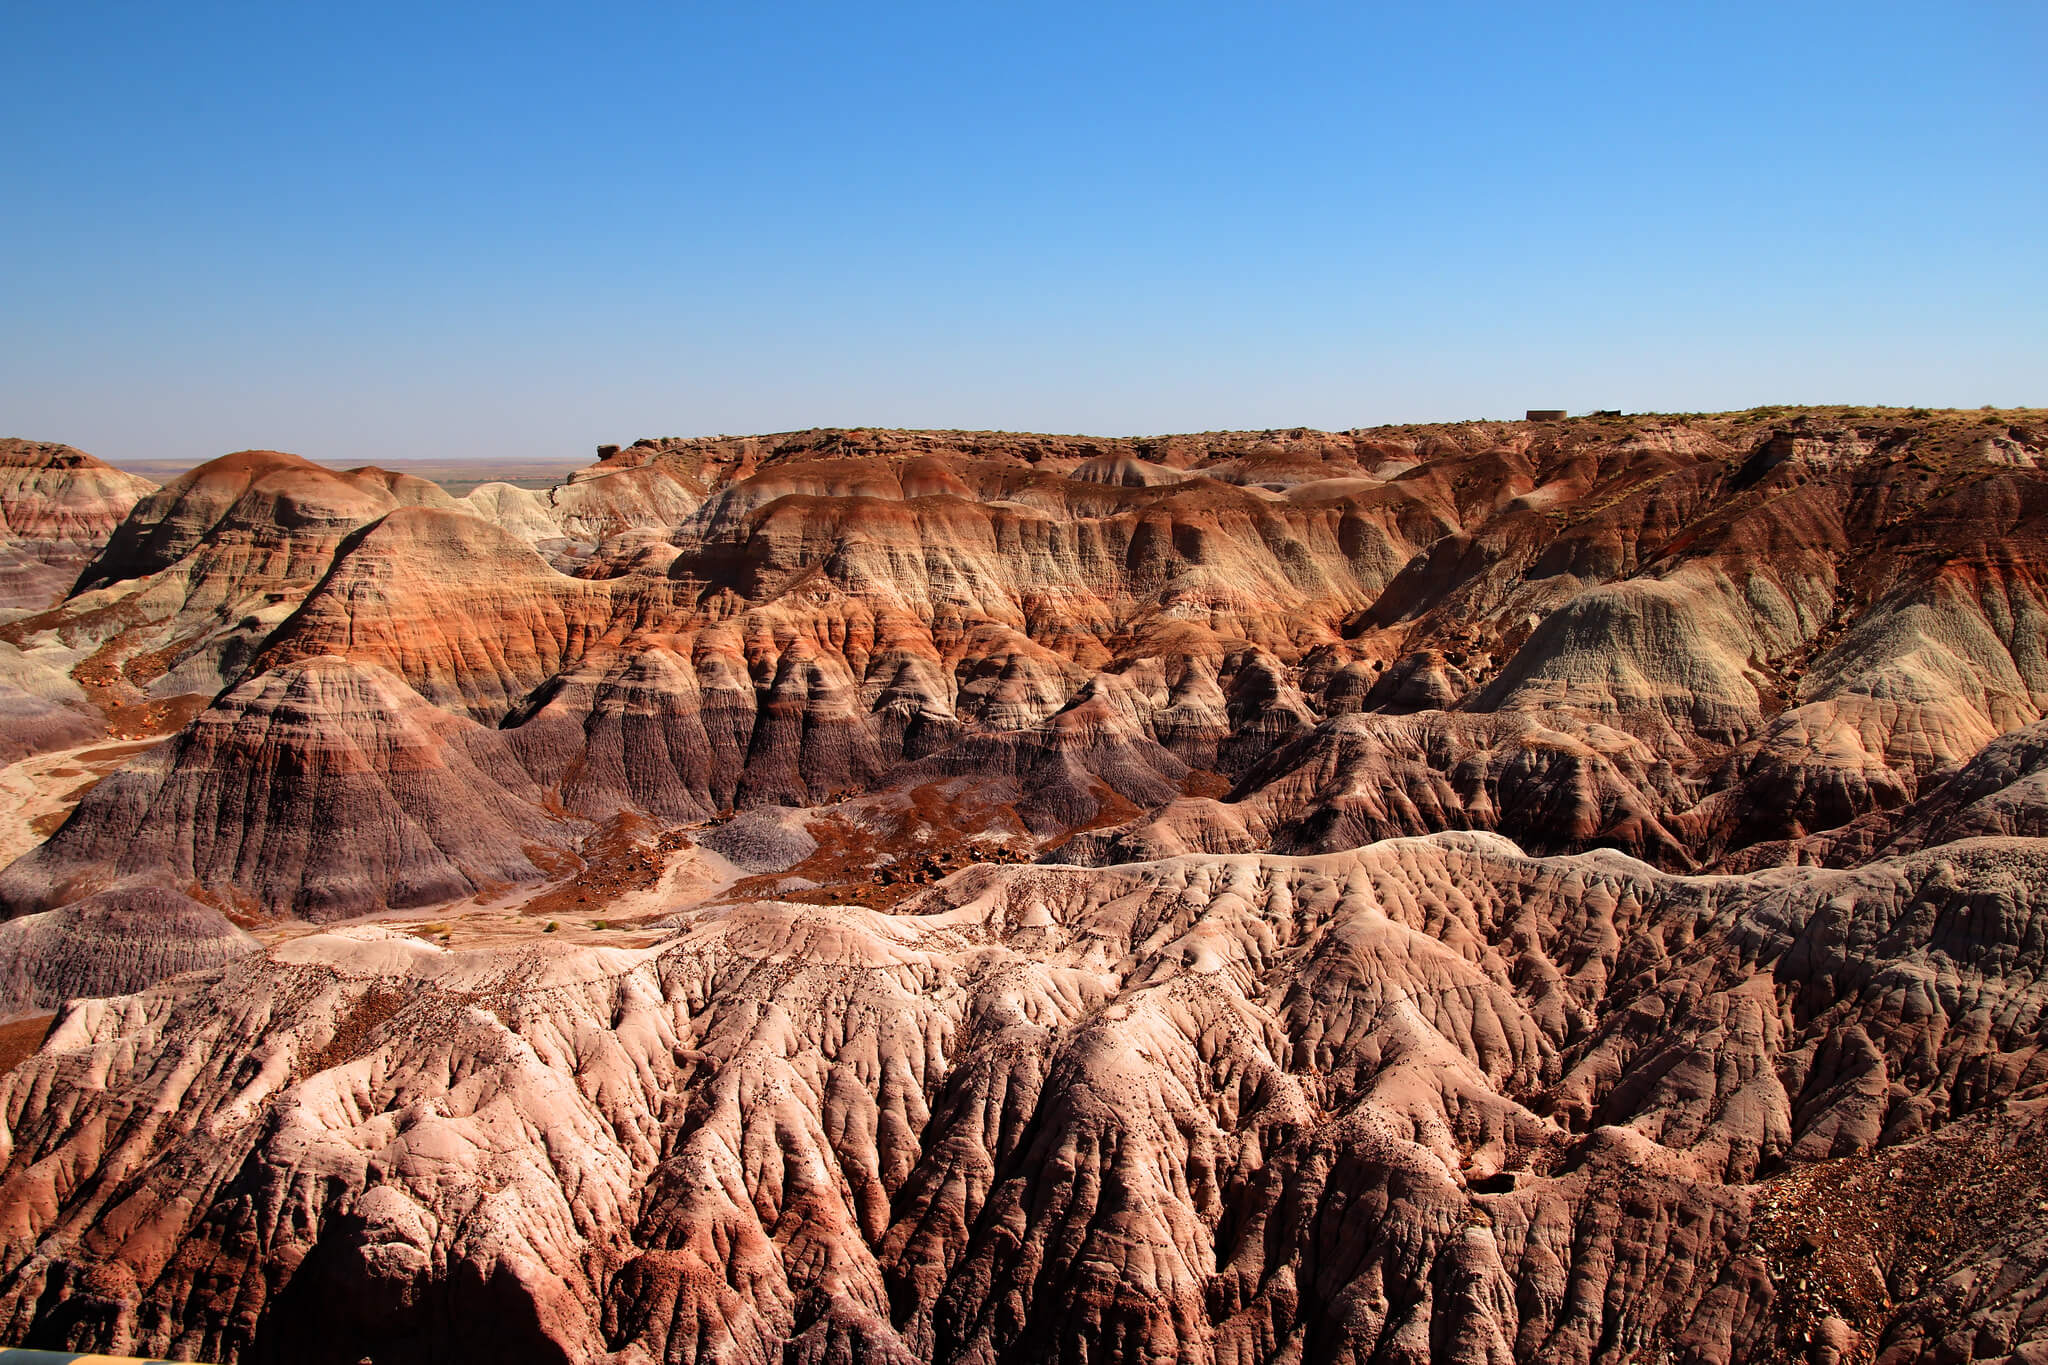 Mountainous rock formations abound on the Painted Desert.